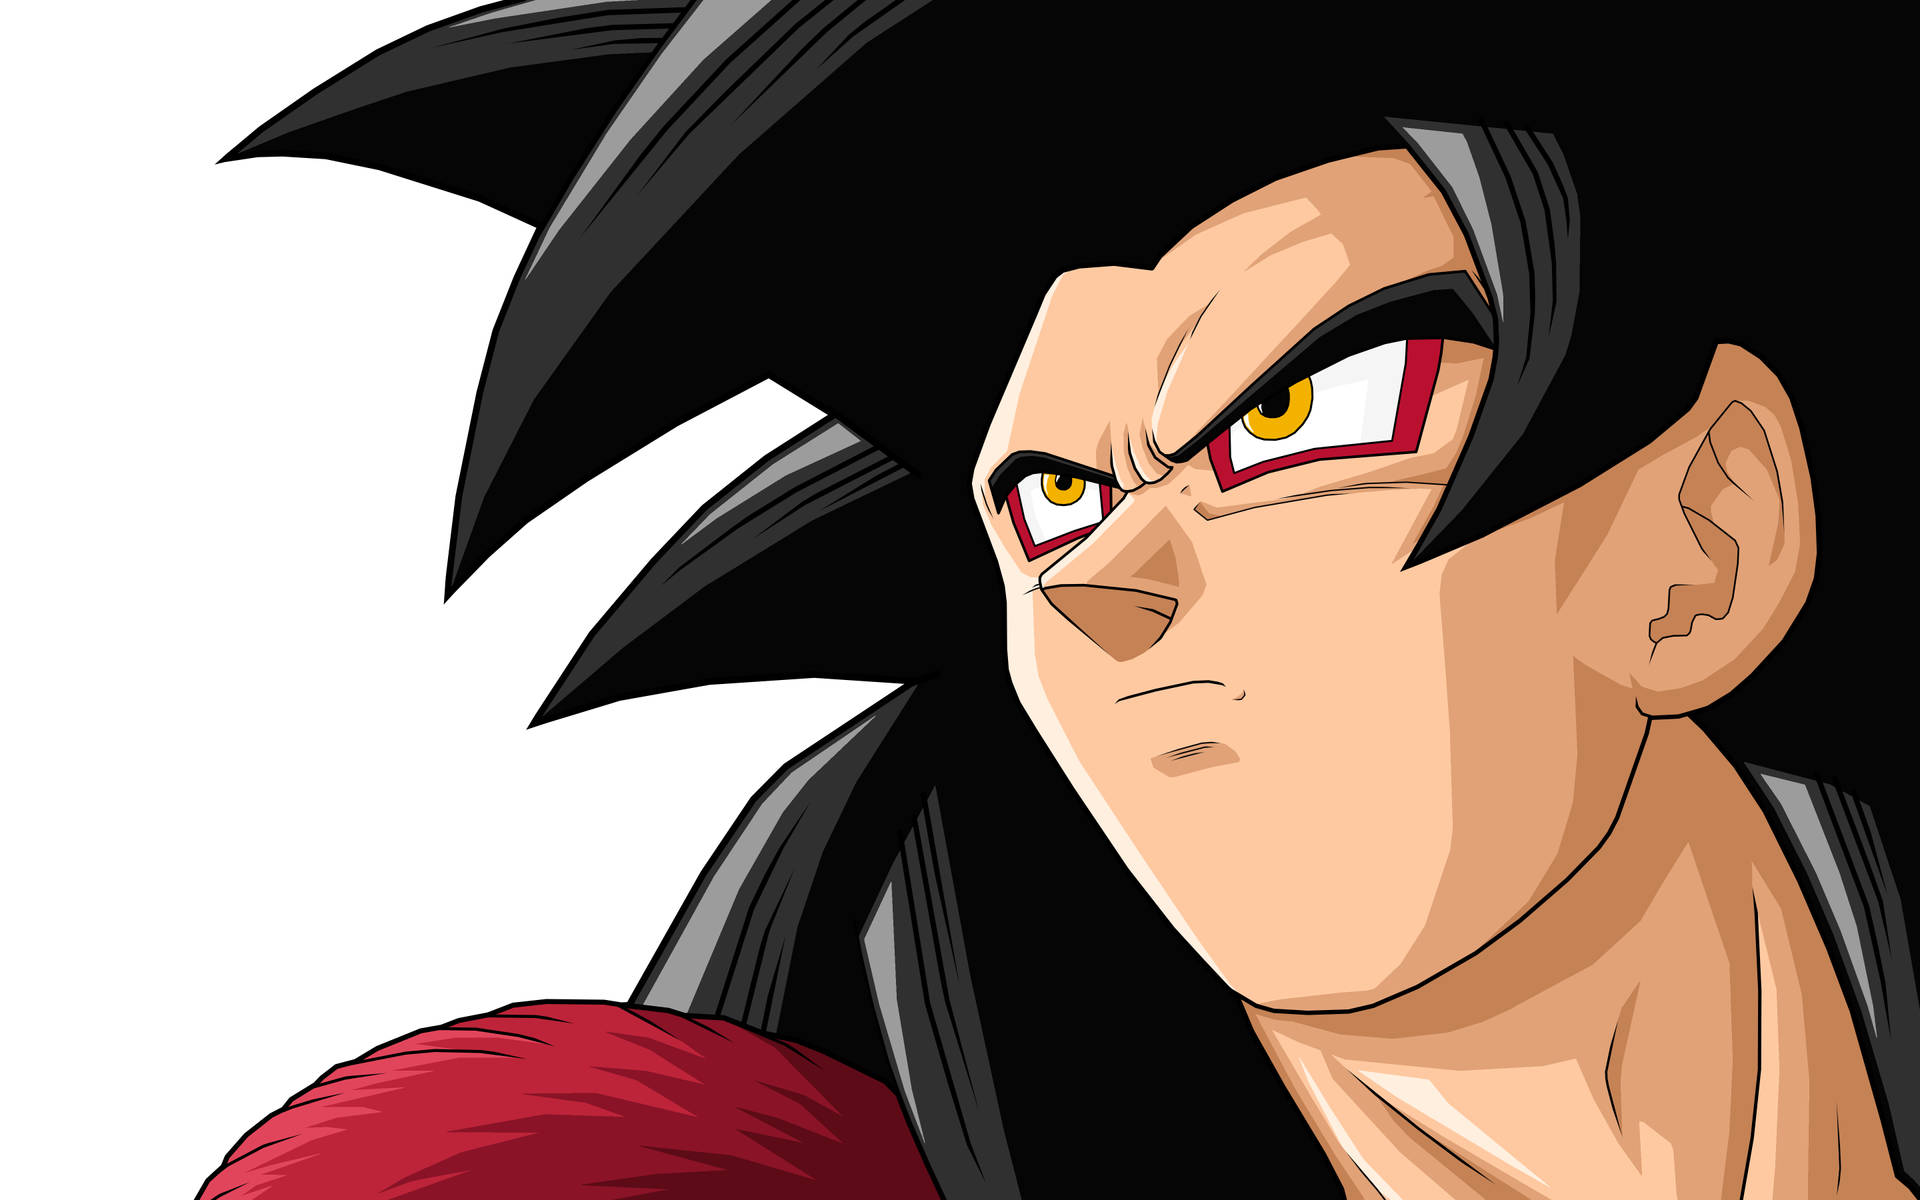 Free Awesome Goku Wallpaper Downloads, [100+] Awesome Goku Wallpapers for  FREE 